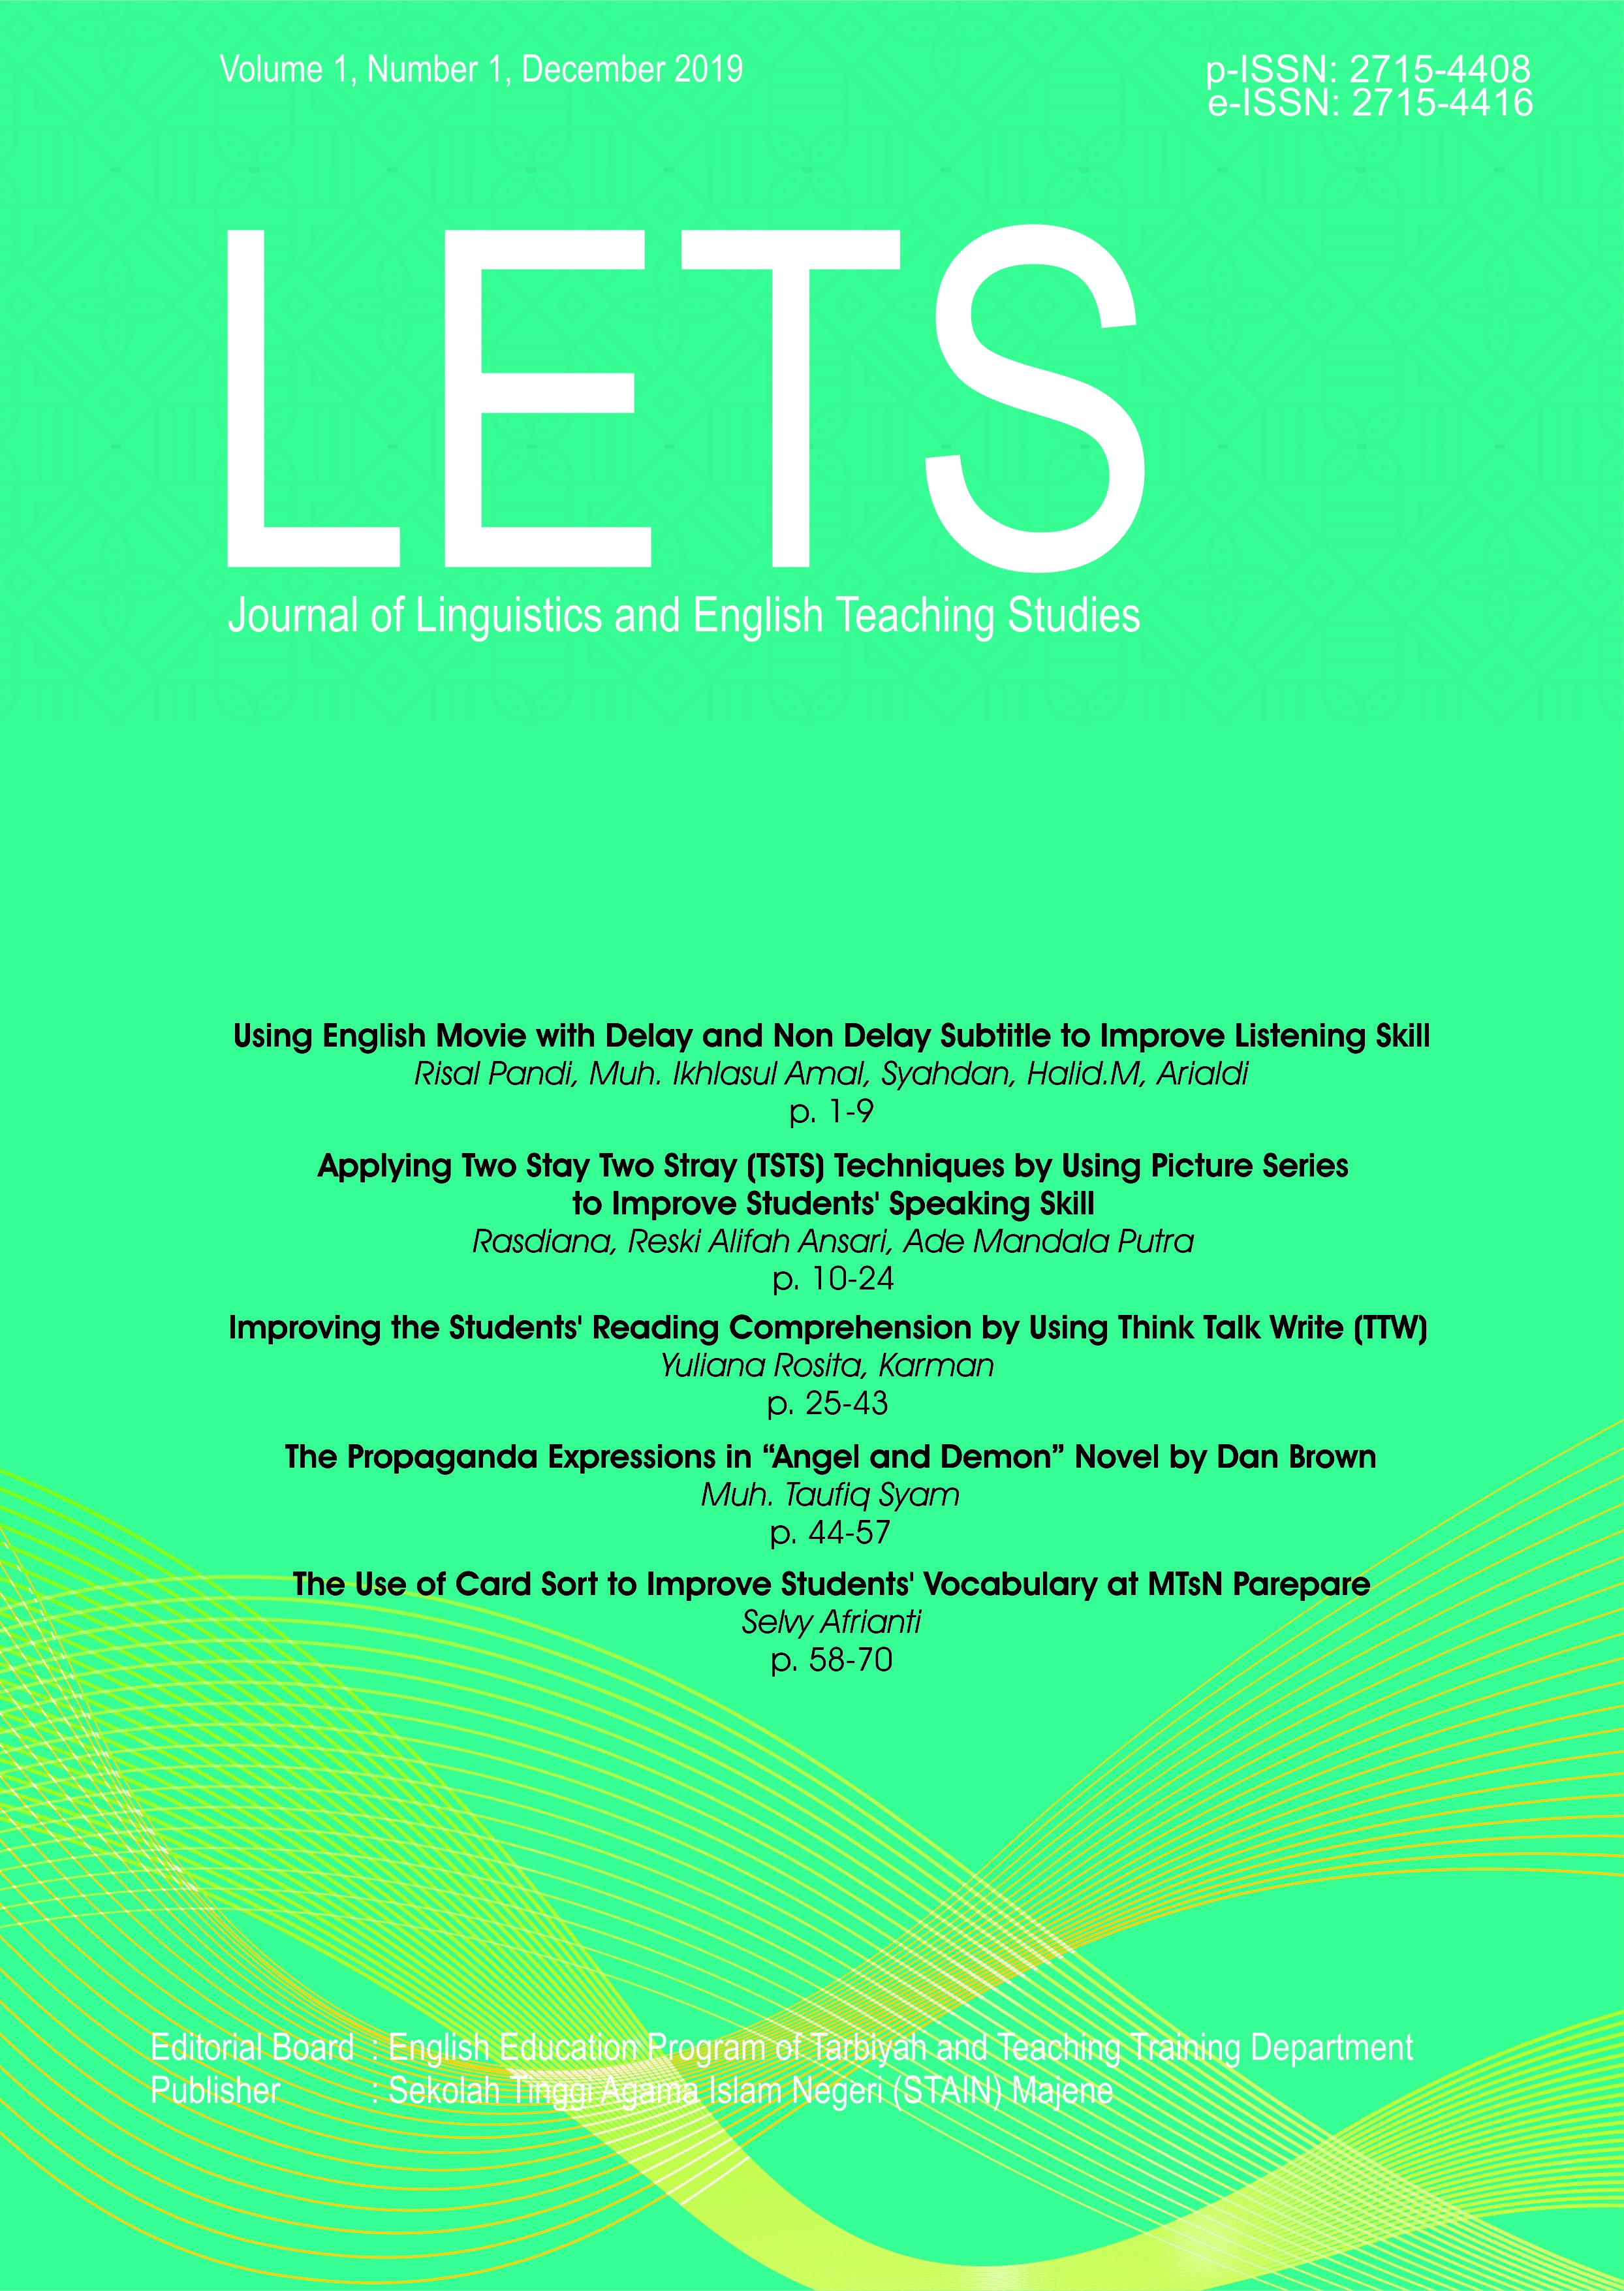 					View Vol. 1 No. 1 (2019): LETS: Journal of Linguistics and English Teaching Studies
				